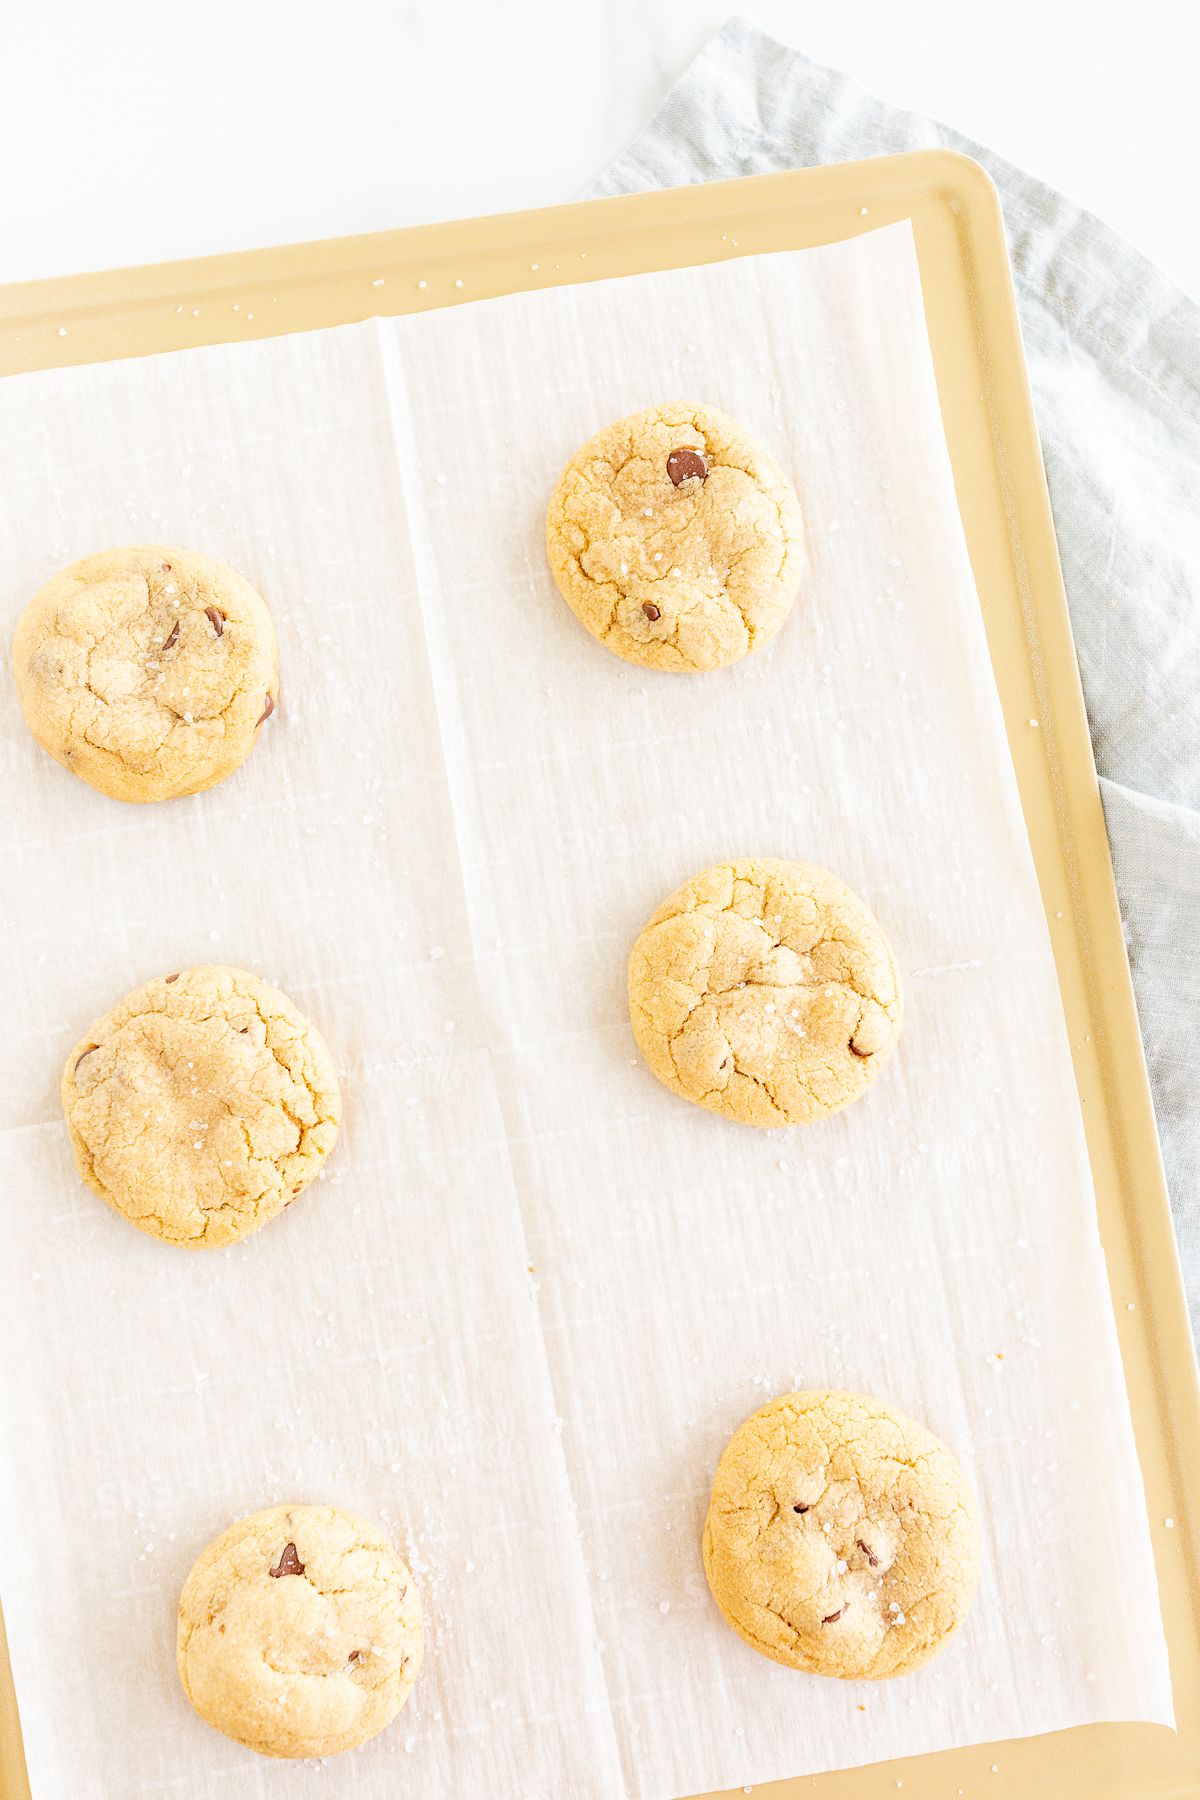 Salted caramel chocolate chip cookies on a parchment lined baking sheet.